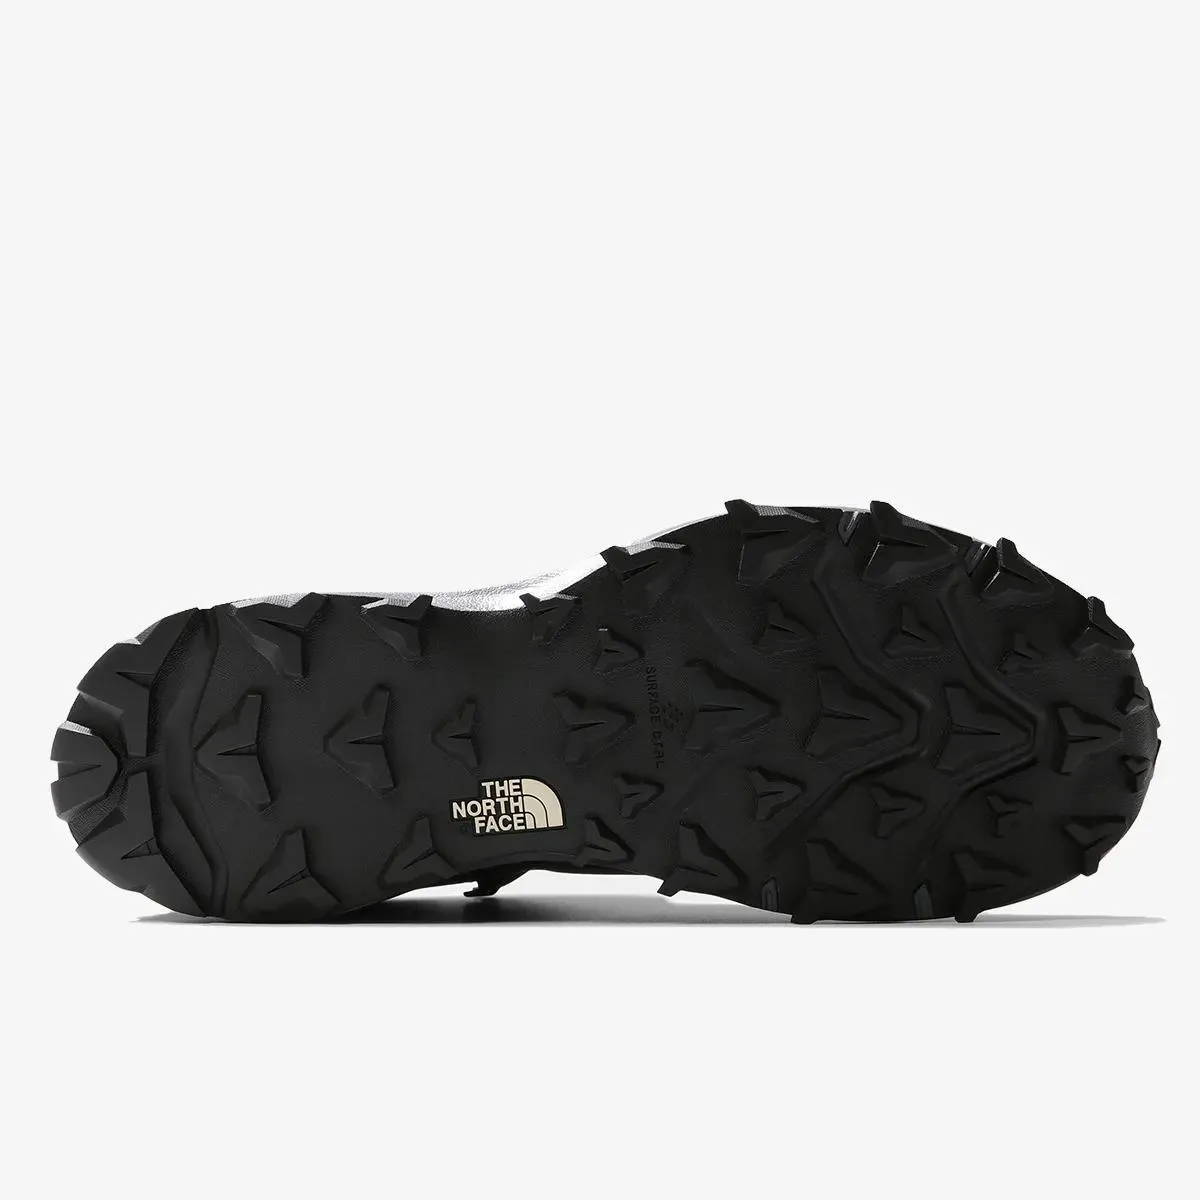 The North Face Čizme Fastpack Mid 